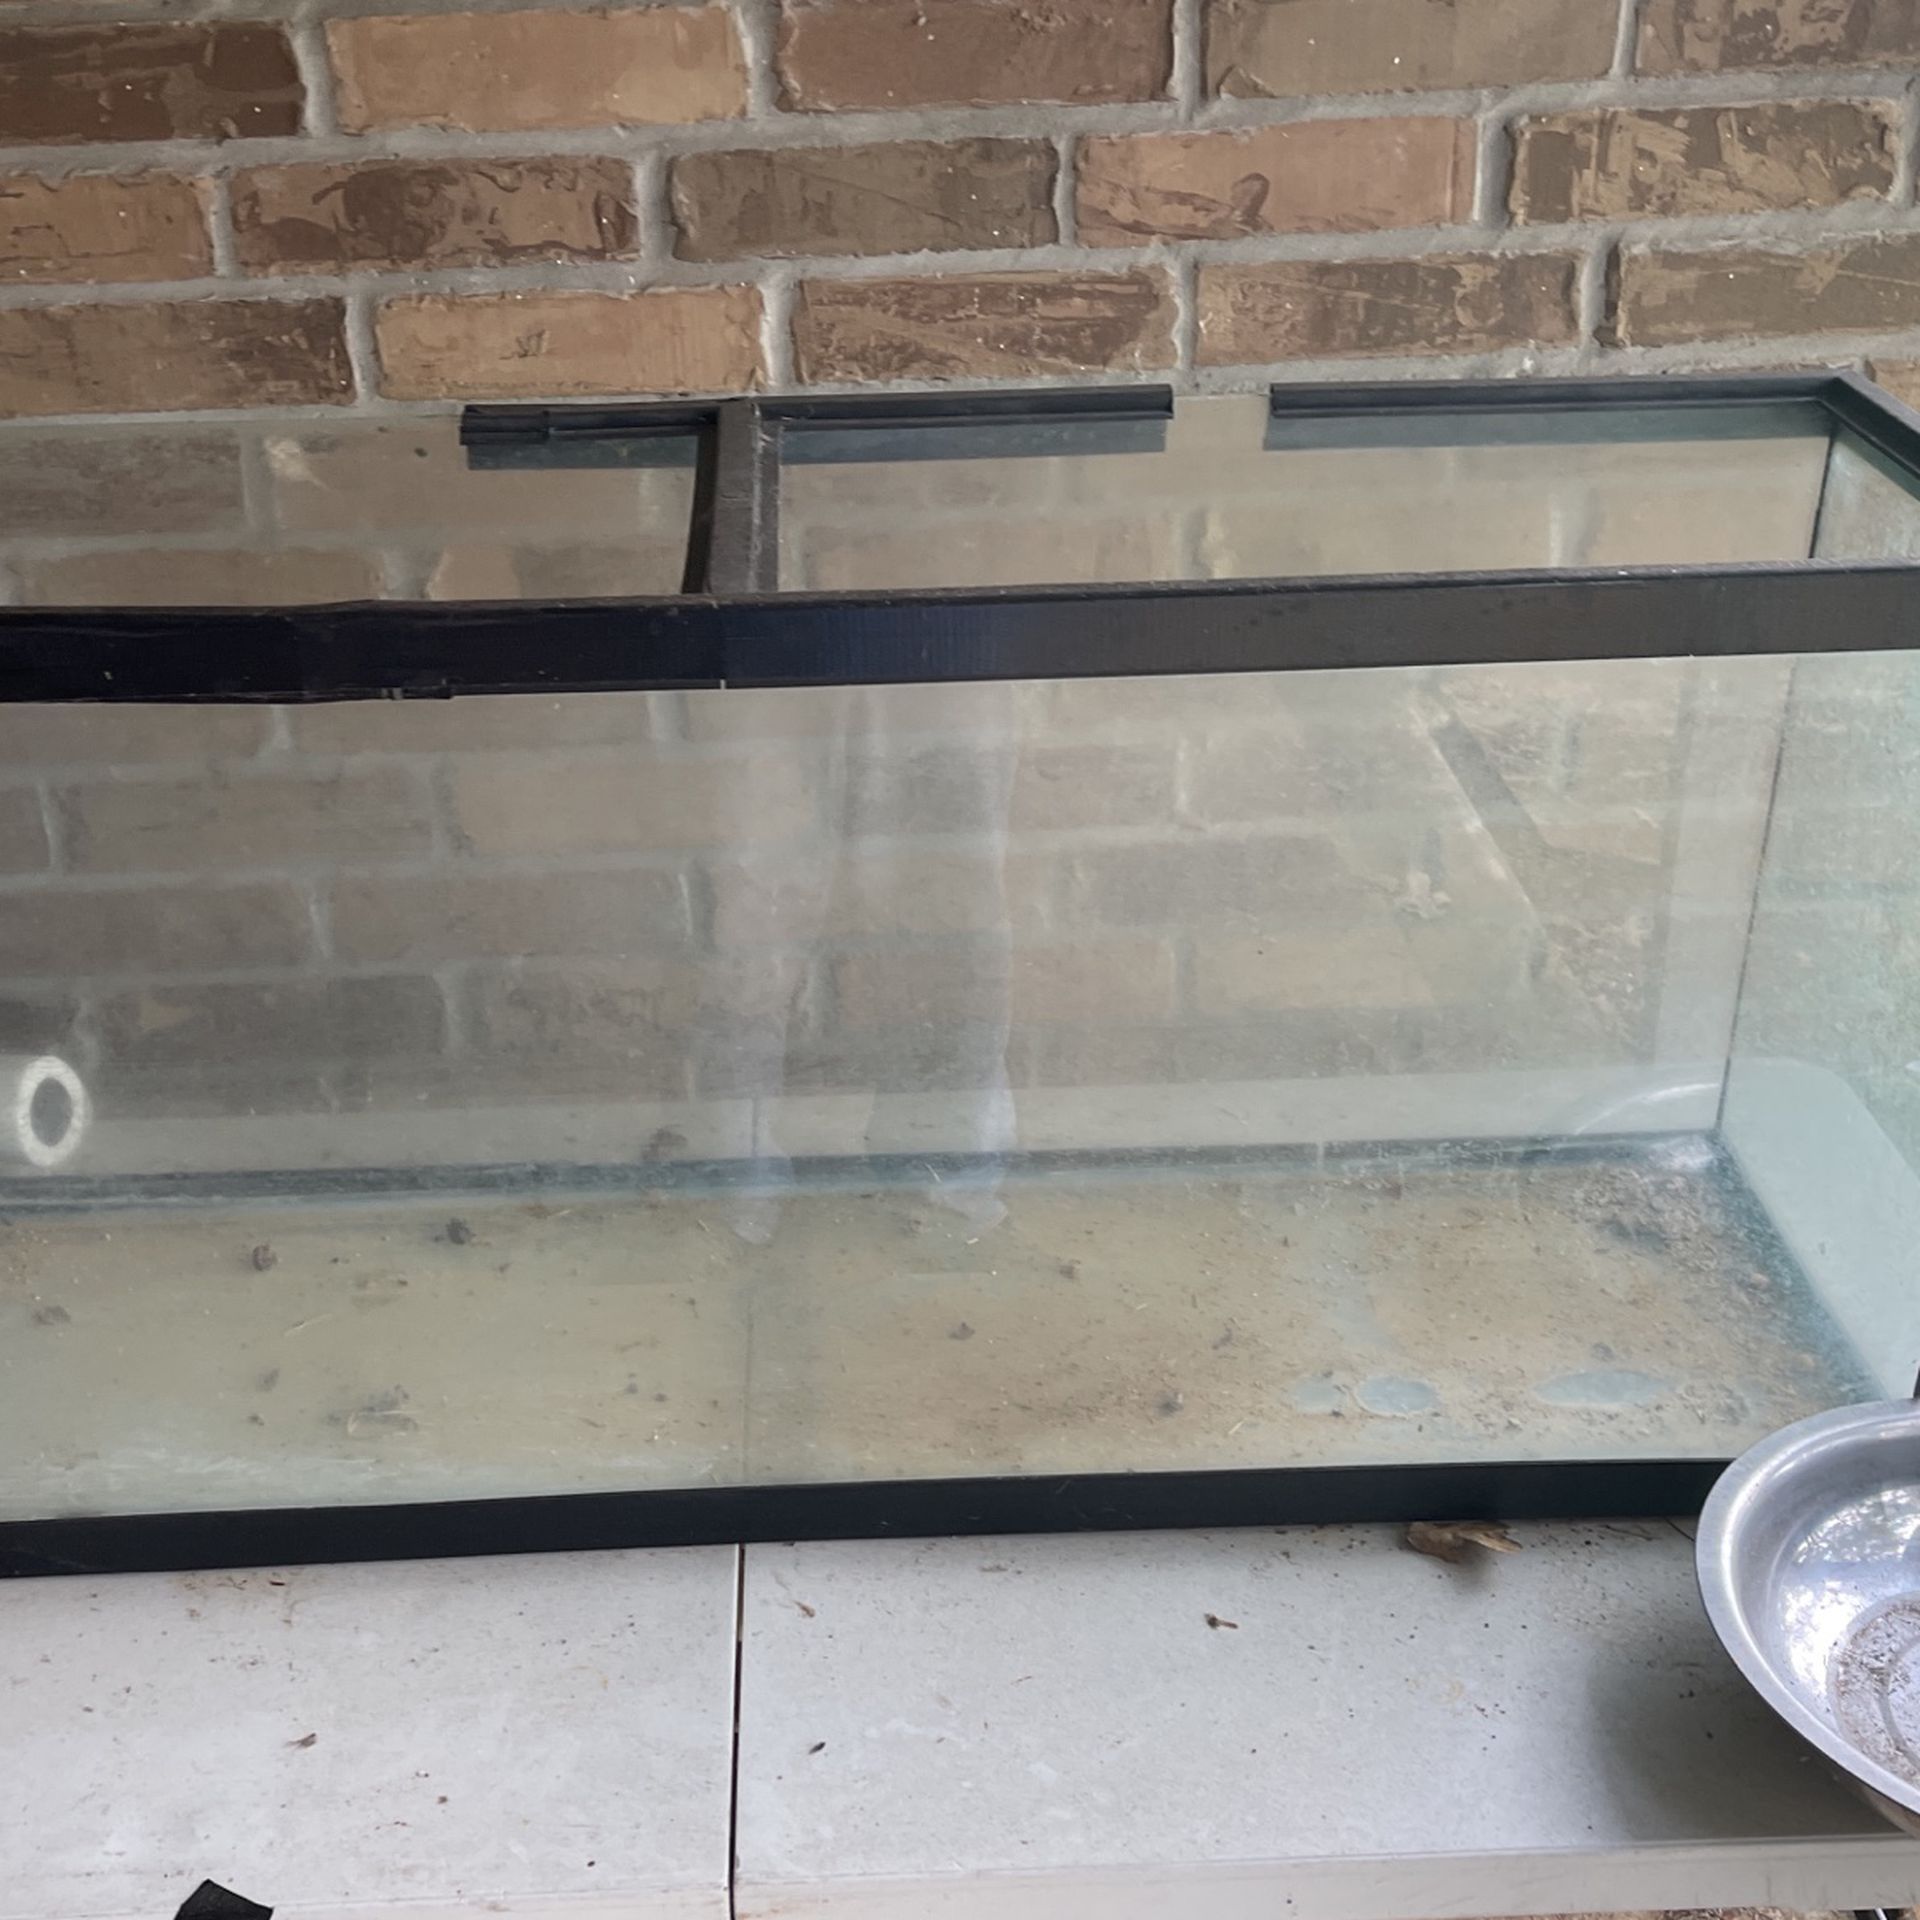 55 Gallon Tank Holds Water Great,  Asking $35For It, It Needs Some New Trim Work That Is All, 